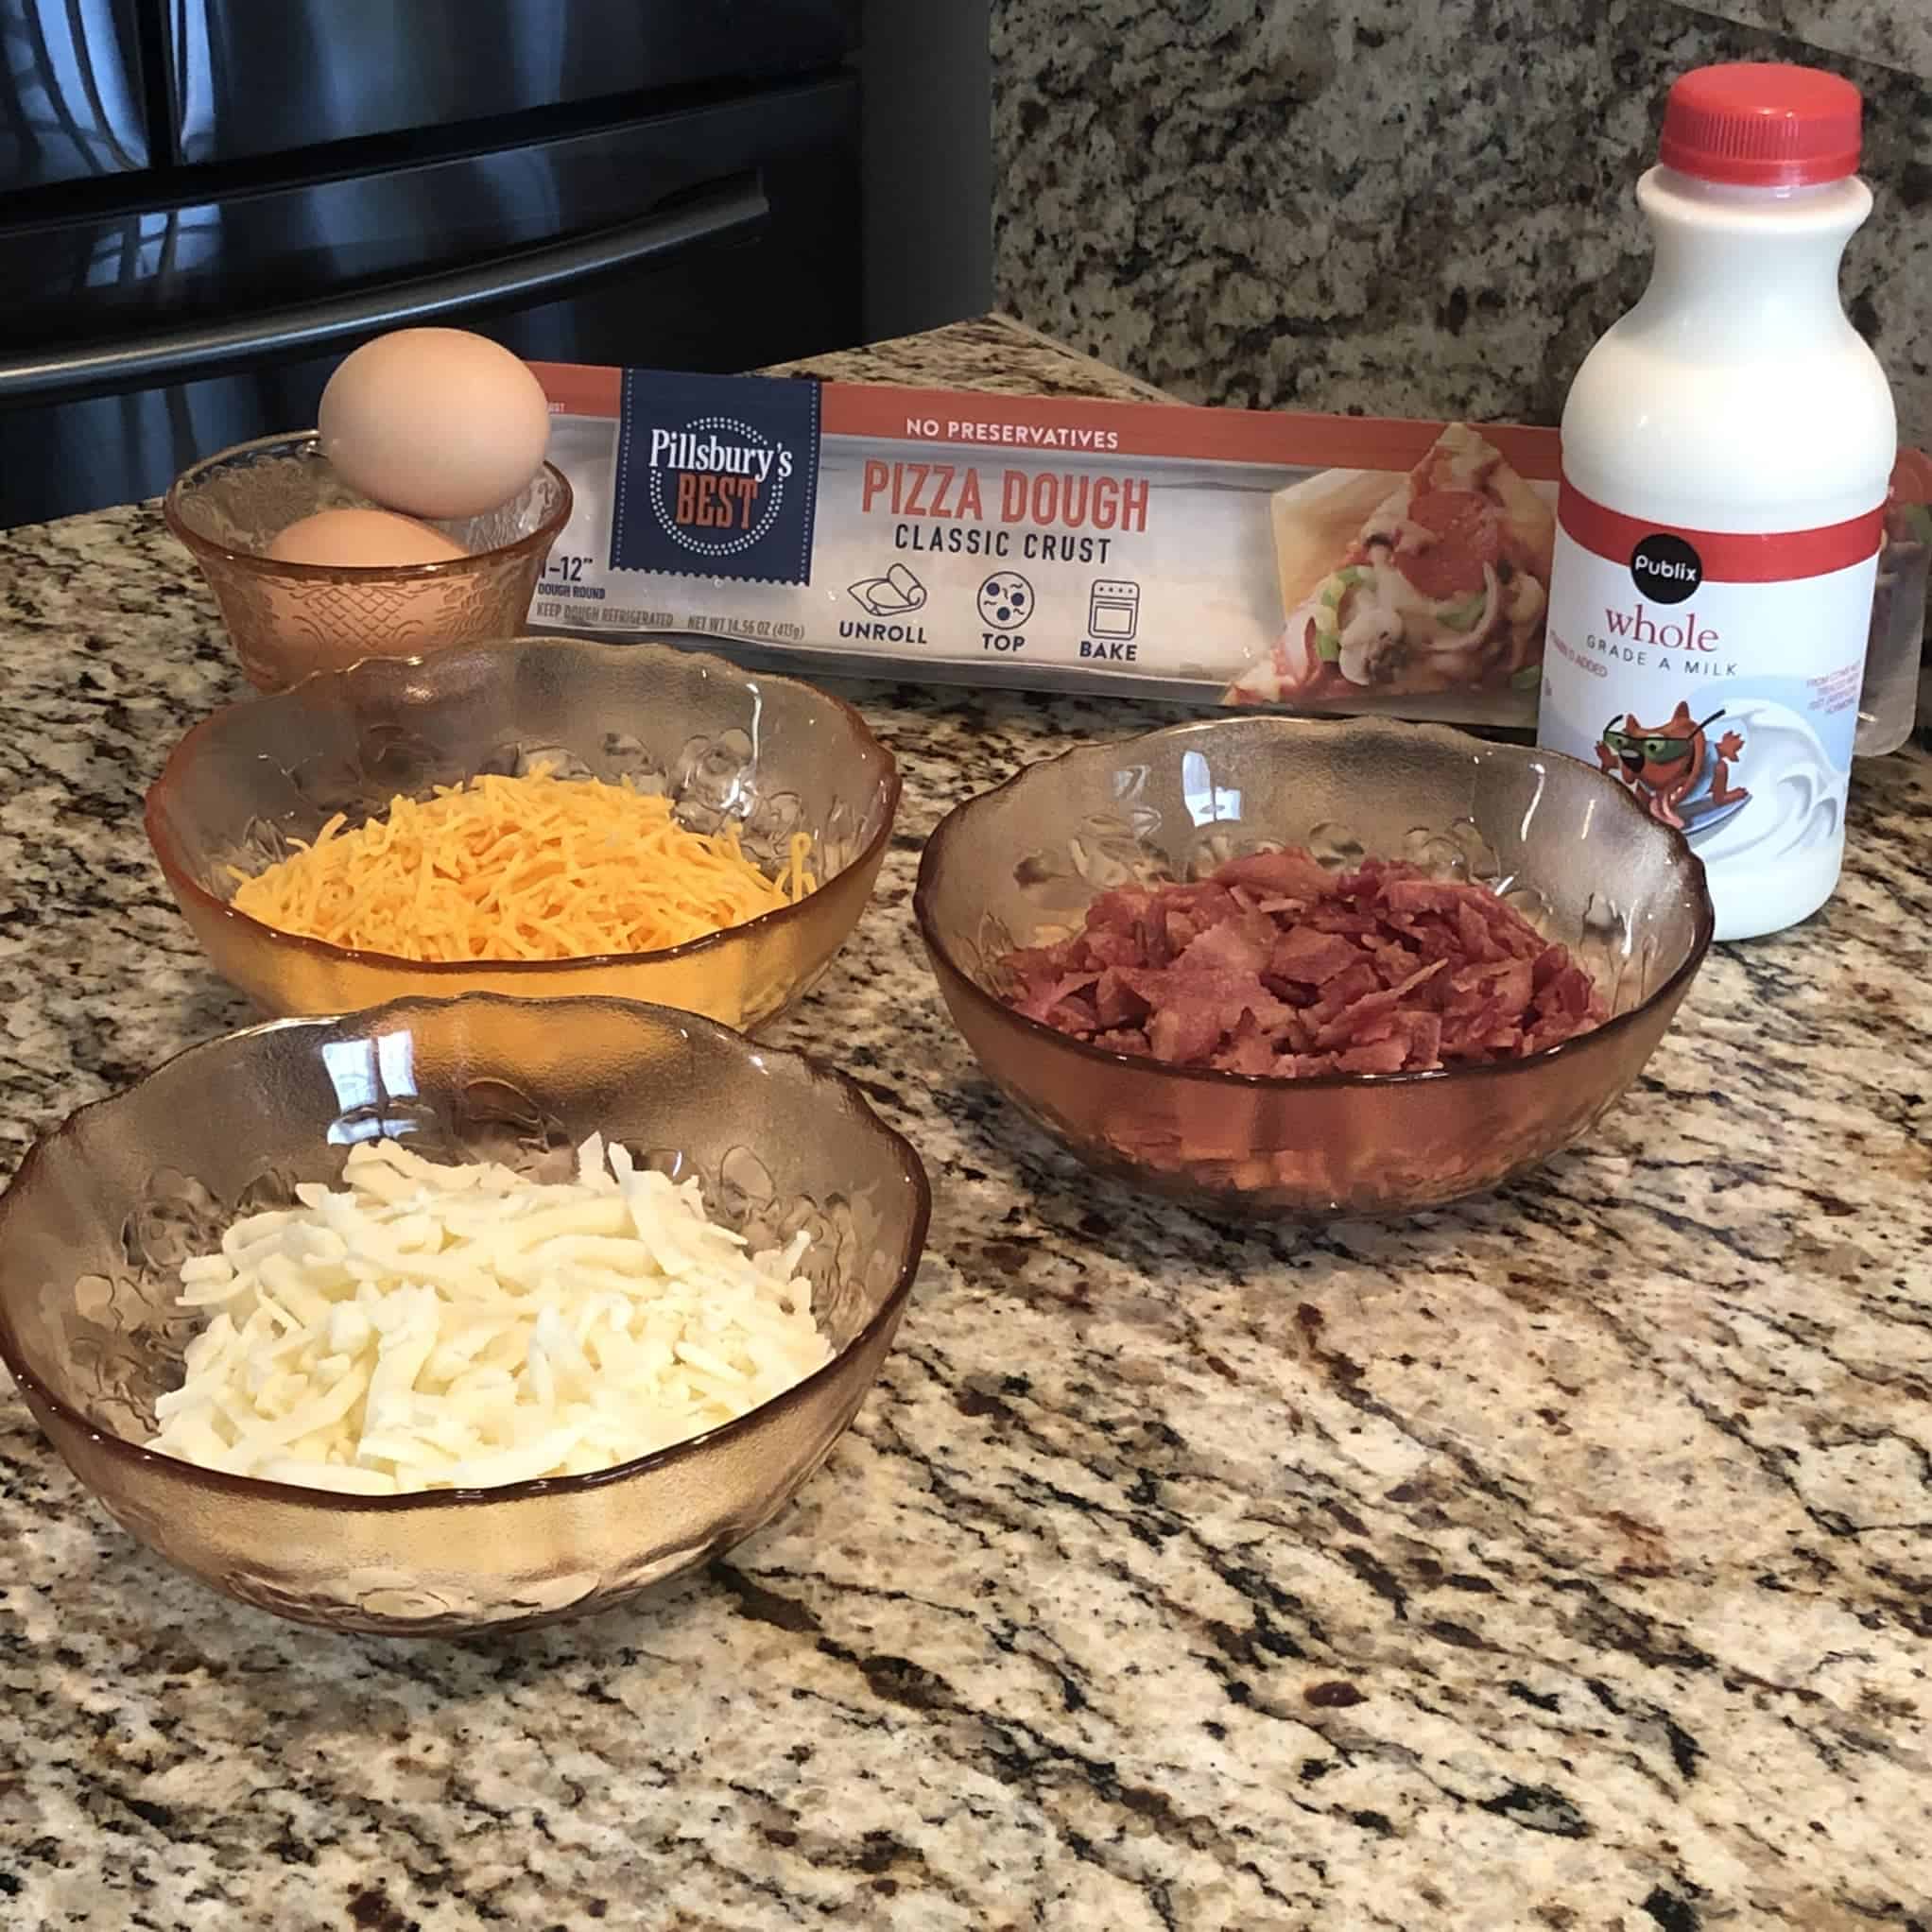 Pizza ingredients include bacon, cheese, eggs, pizza dough and milk